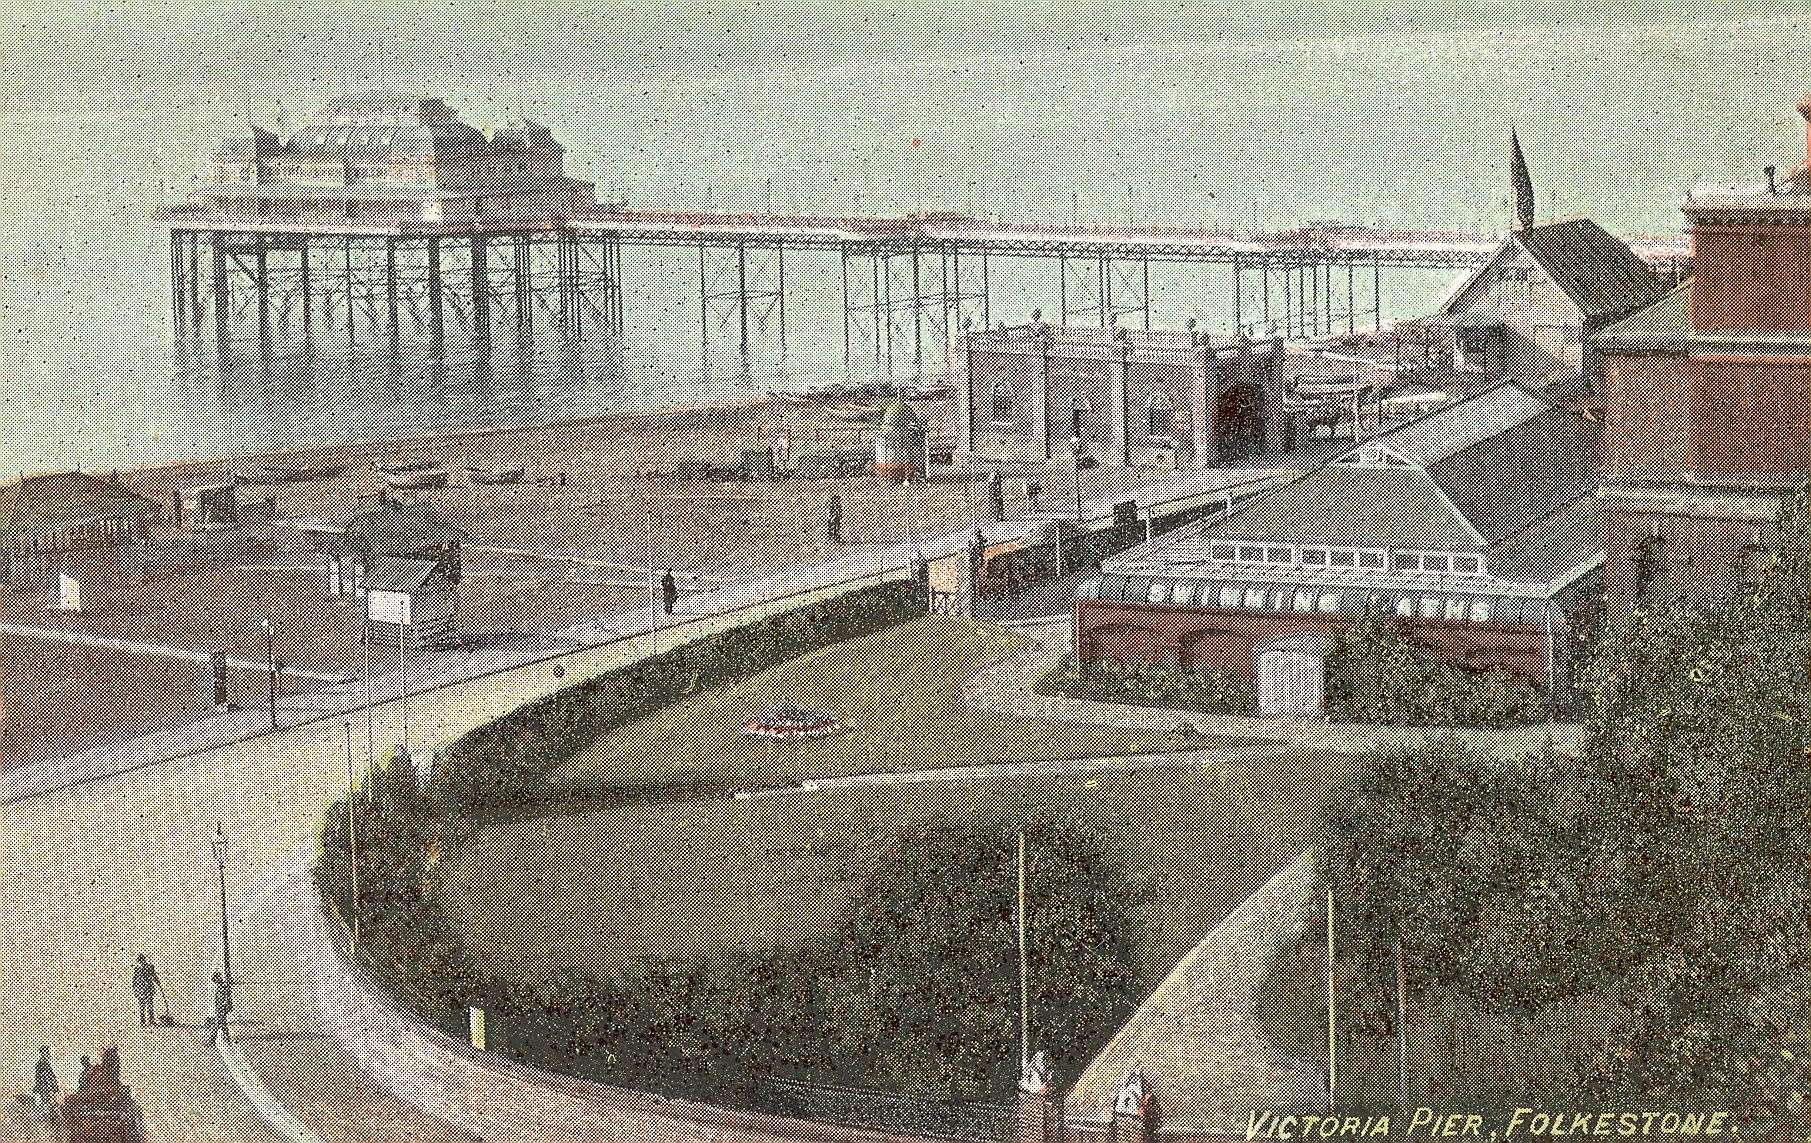 Victoria Pier and the swimming baths in Folkestone